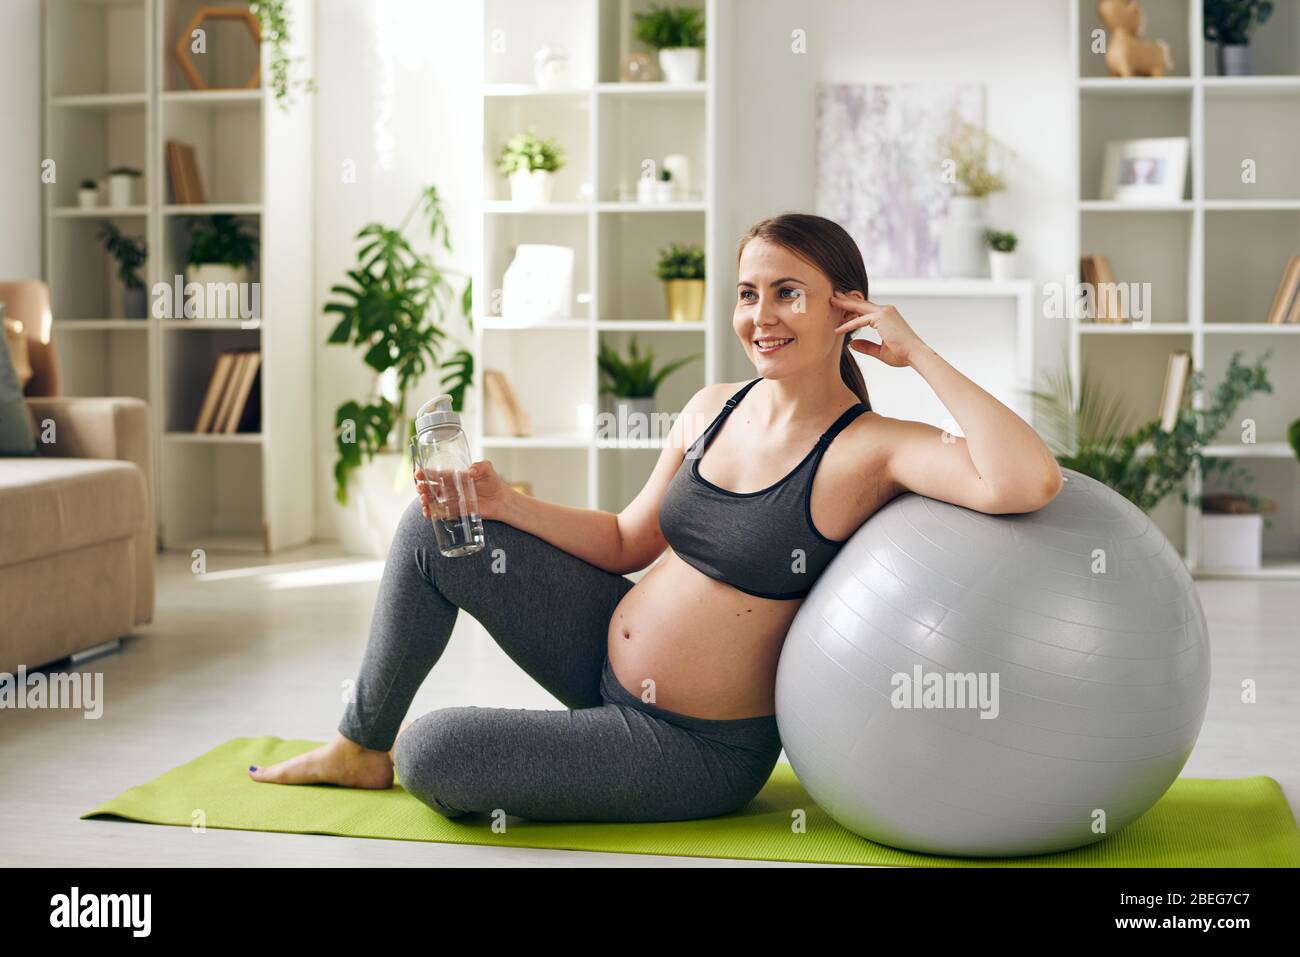 Smiling healthy young pregnant woman in sportswear sitting on yoga mat and leaning on fitball while drinking water at home Stock Photo